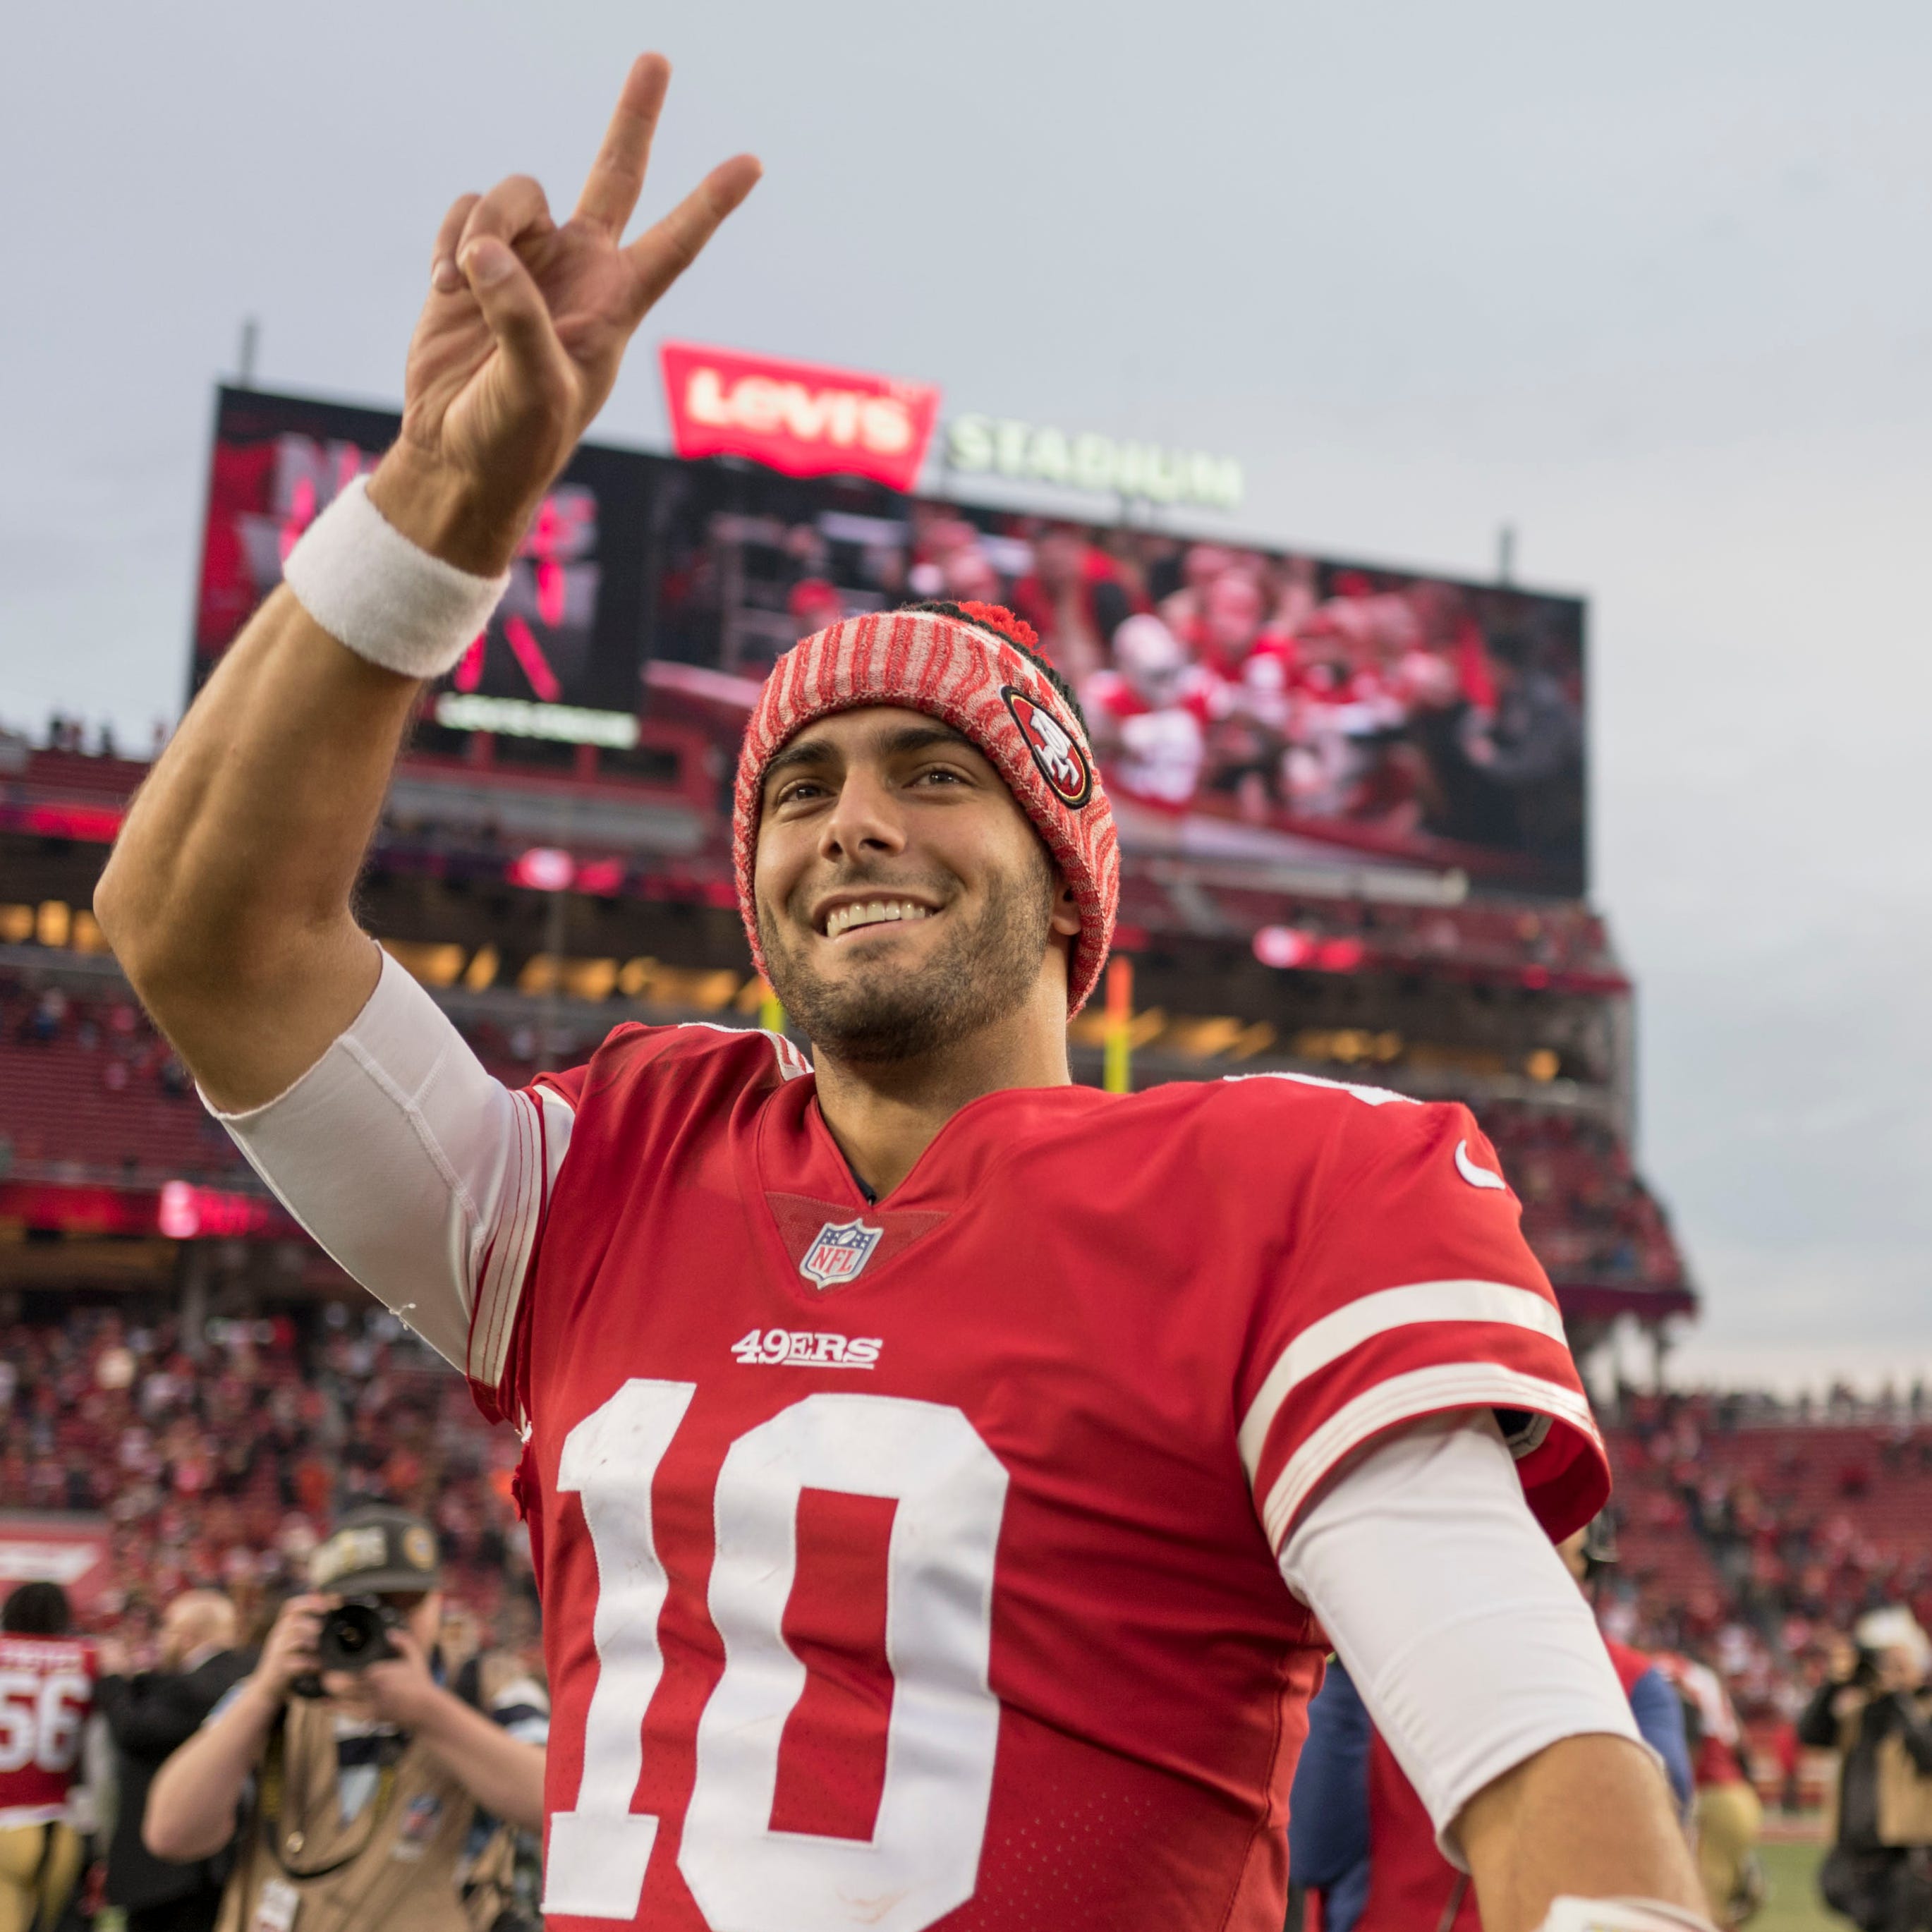 49ers QB Jimmy Garoppolo has never lost an NFL start.